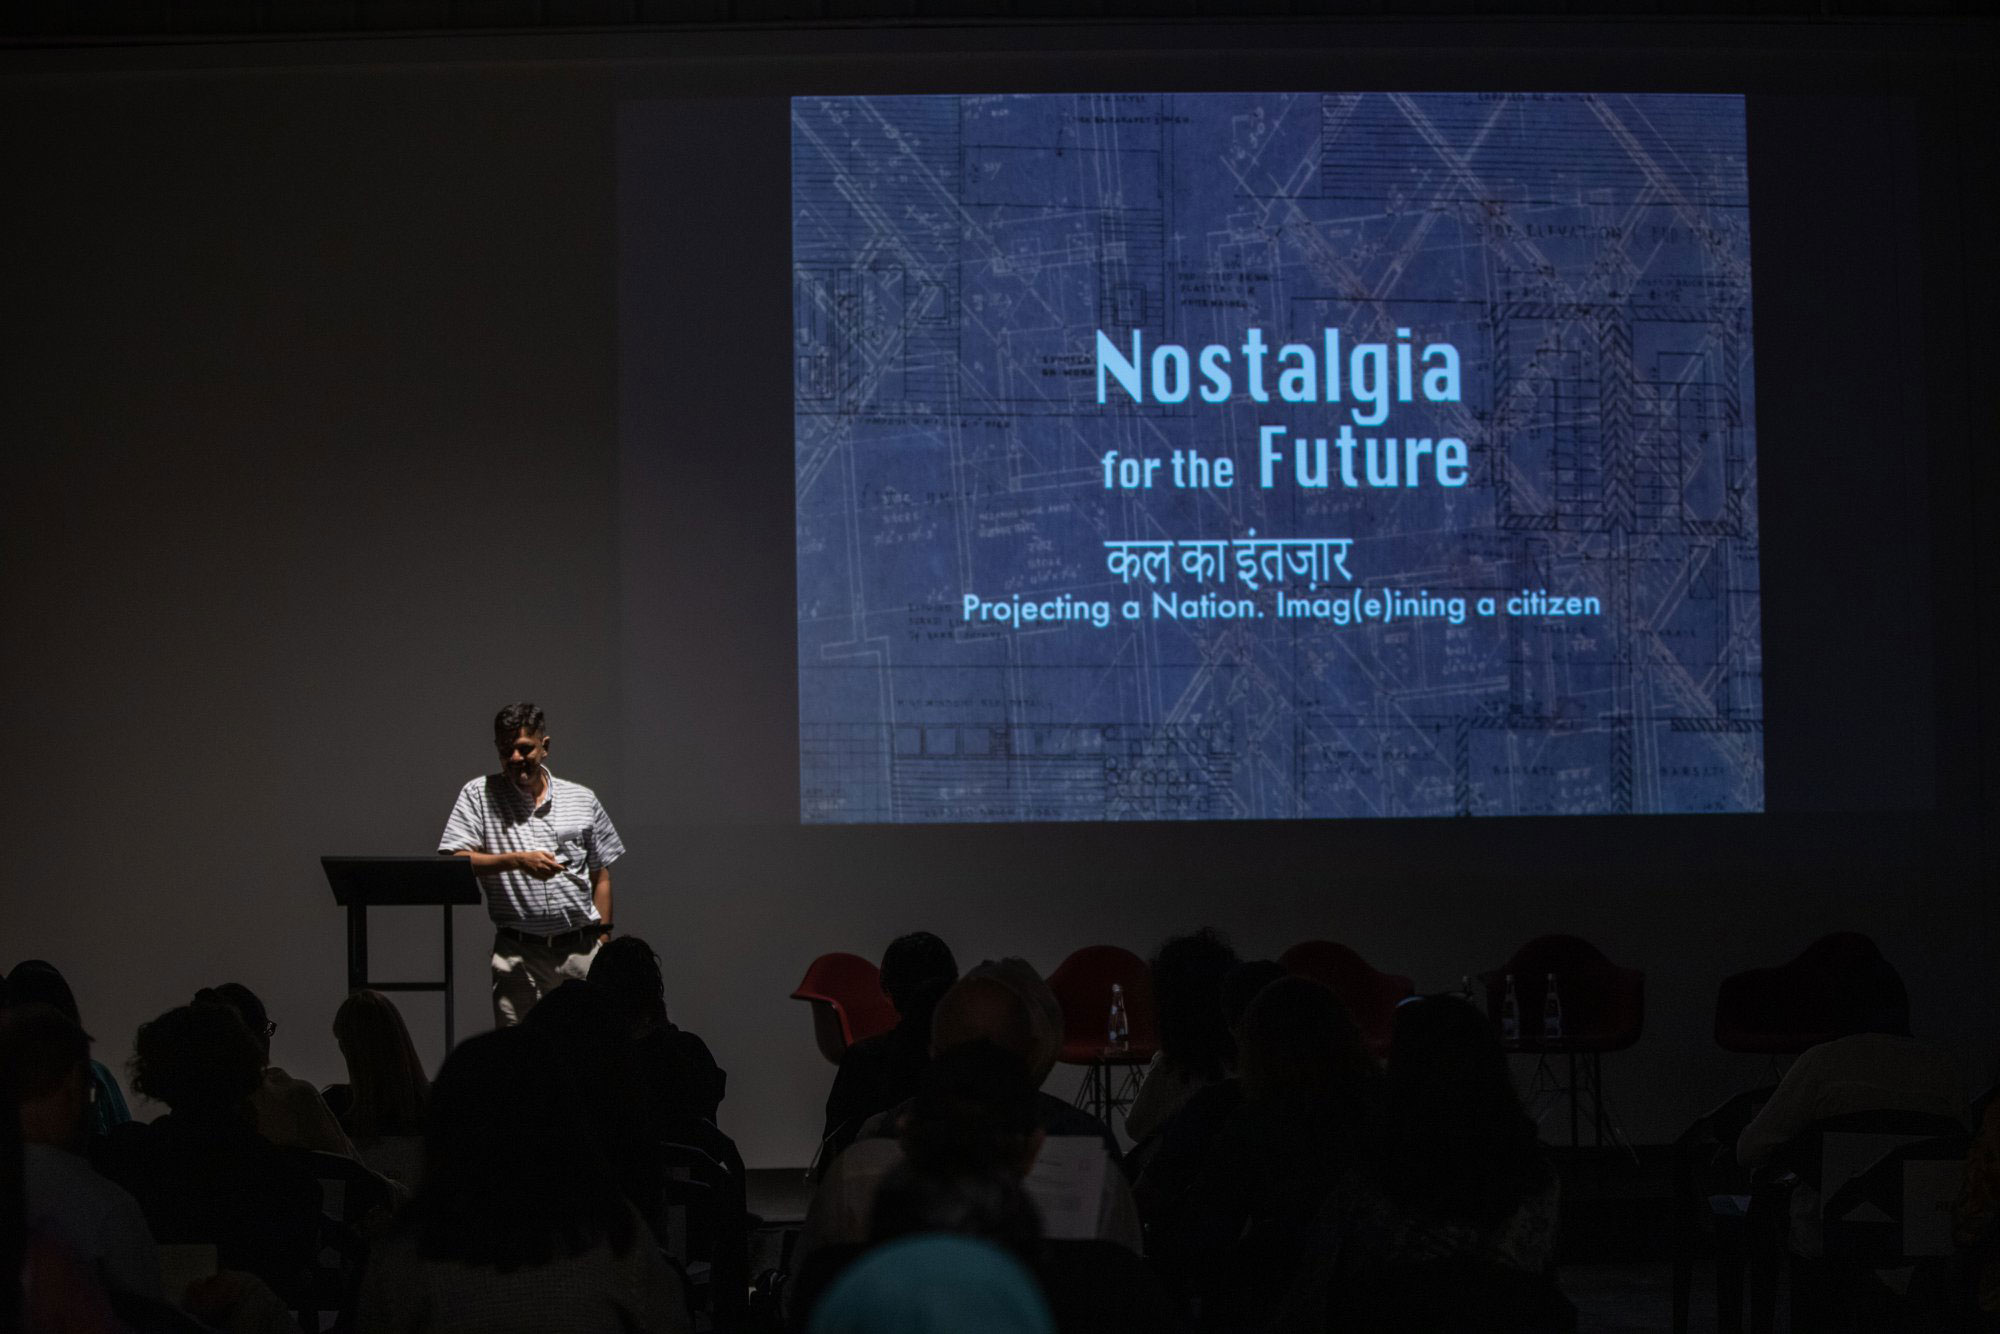 Rohan Shivkumar presenting ‘Nostalgia for the Future: A Meditation on Indian Citizenship, Modernity and the Architecture of the Home’ as part of ‘Temporary Spaces’ at the Alserkal Arts Foundation Project Space in Dubai on 1 November 2019.